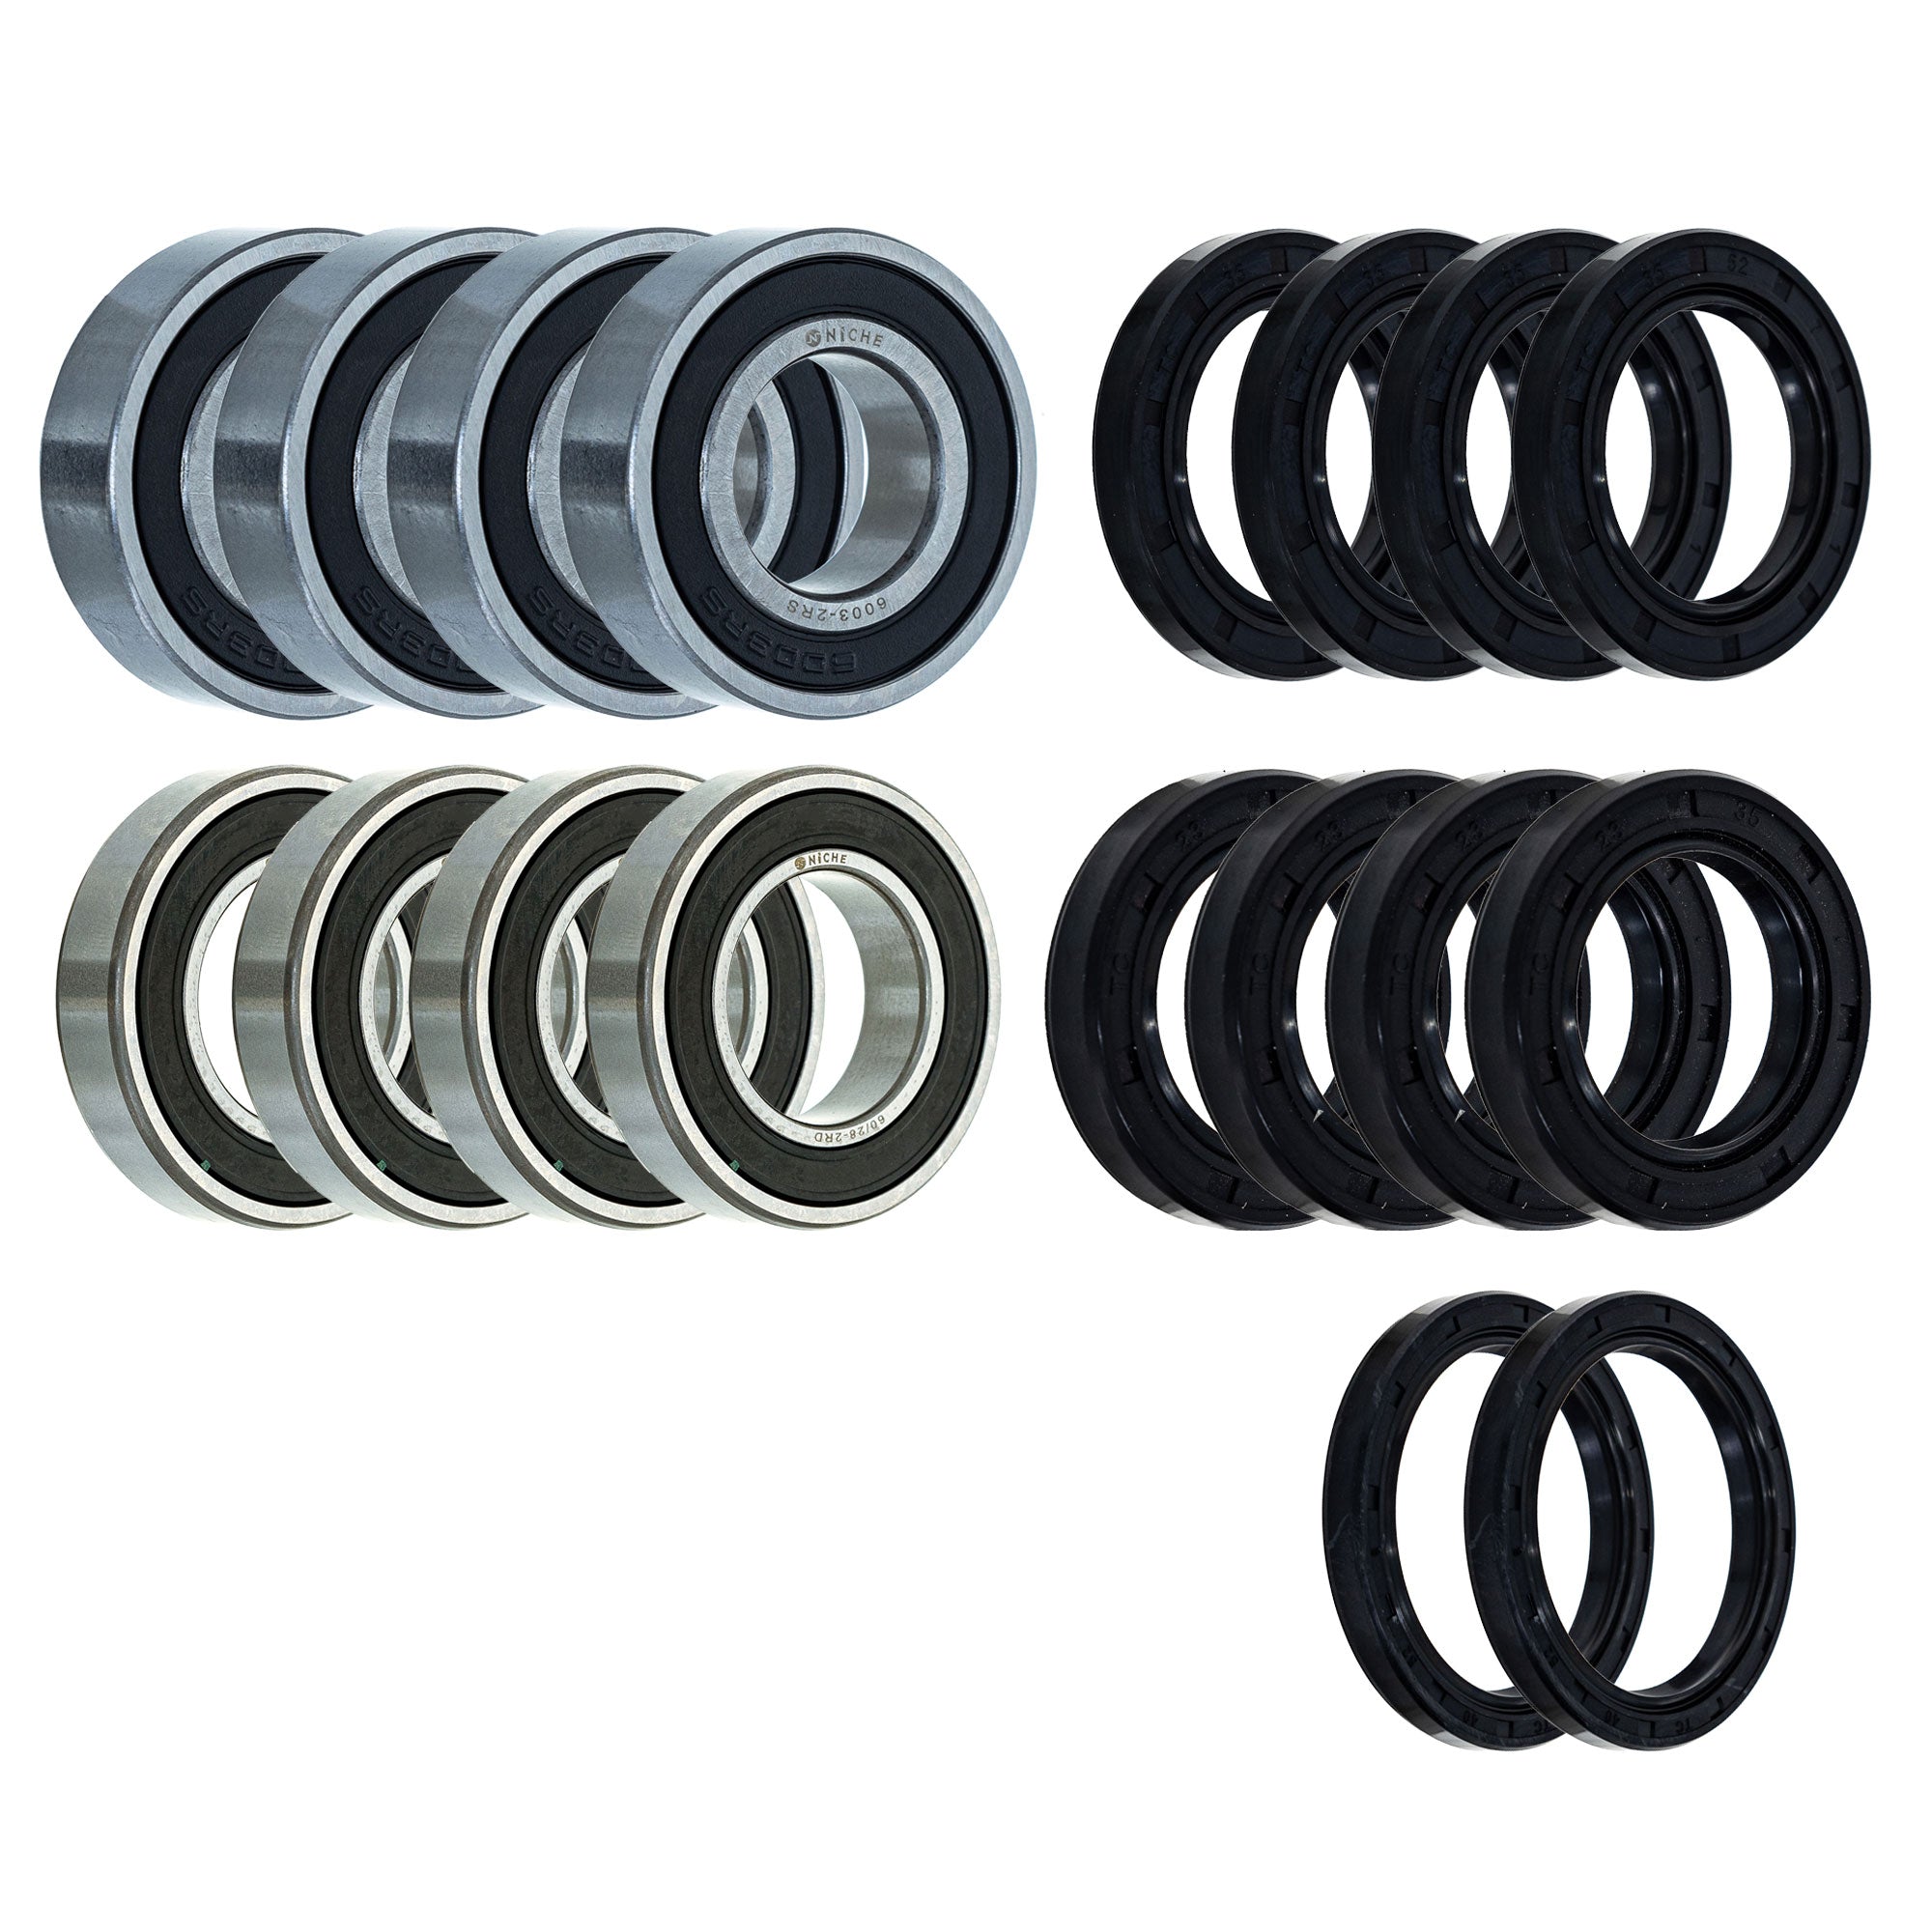 Wheel Bearing Seal Kit for zOTHER Champ NICHE MK1008430